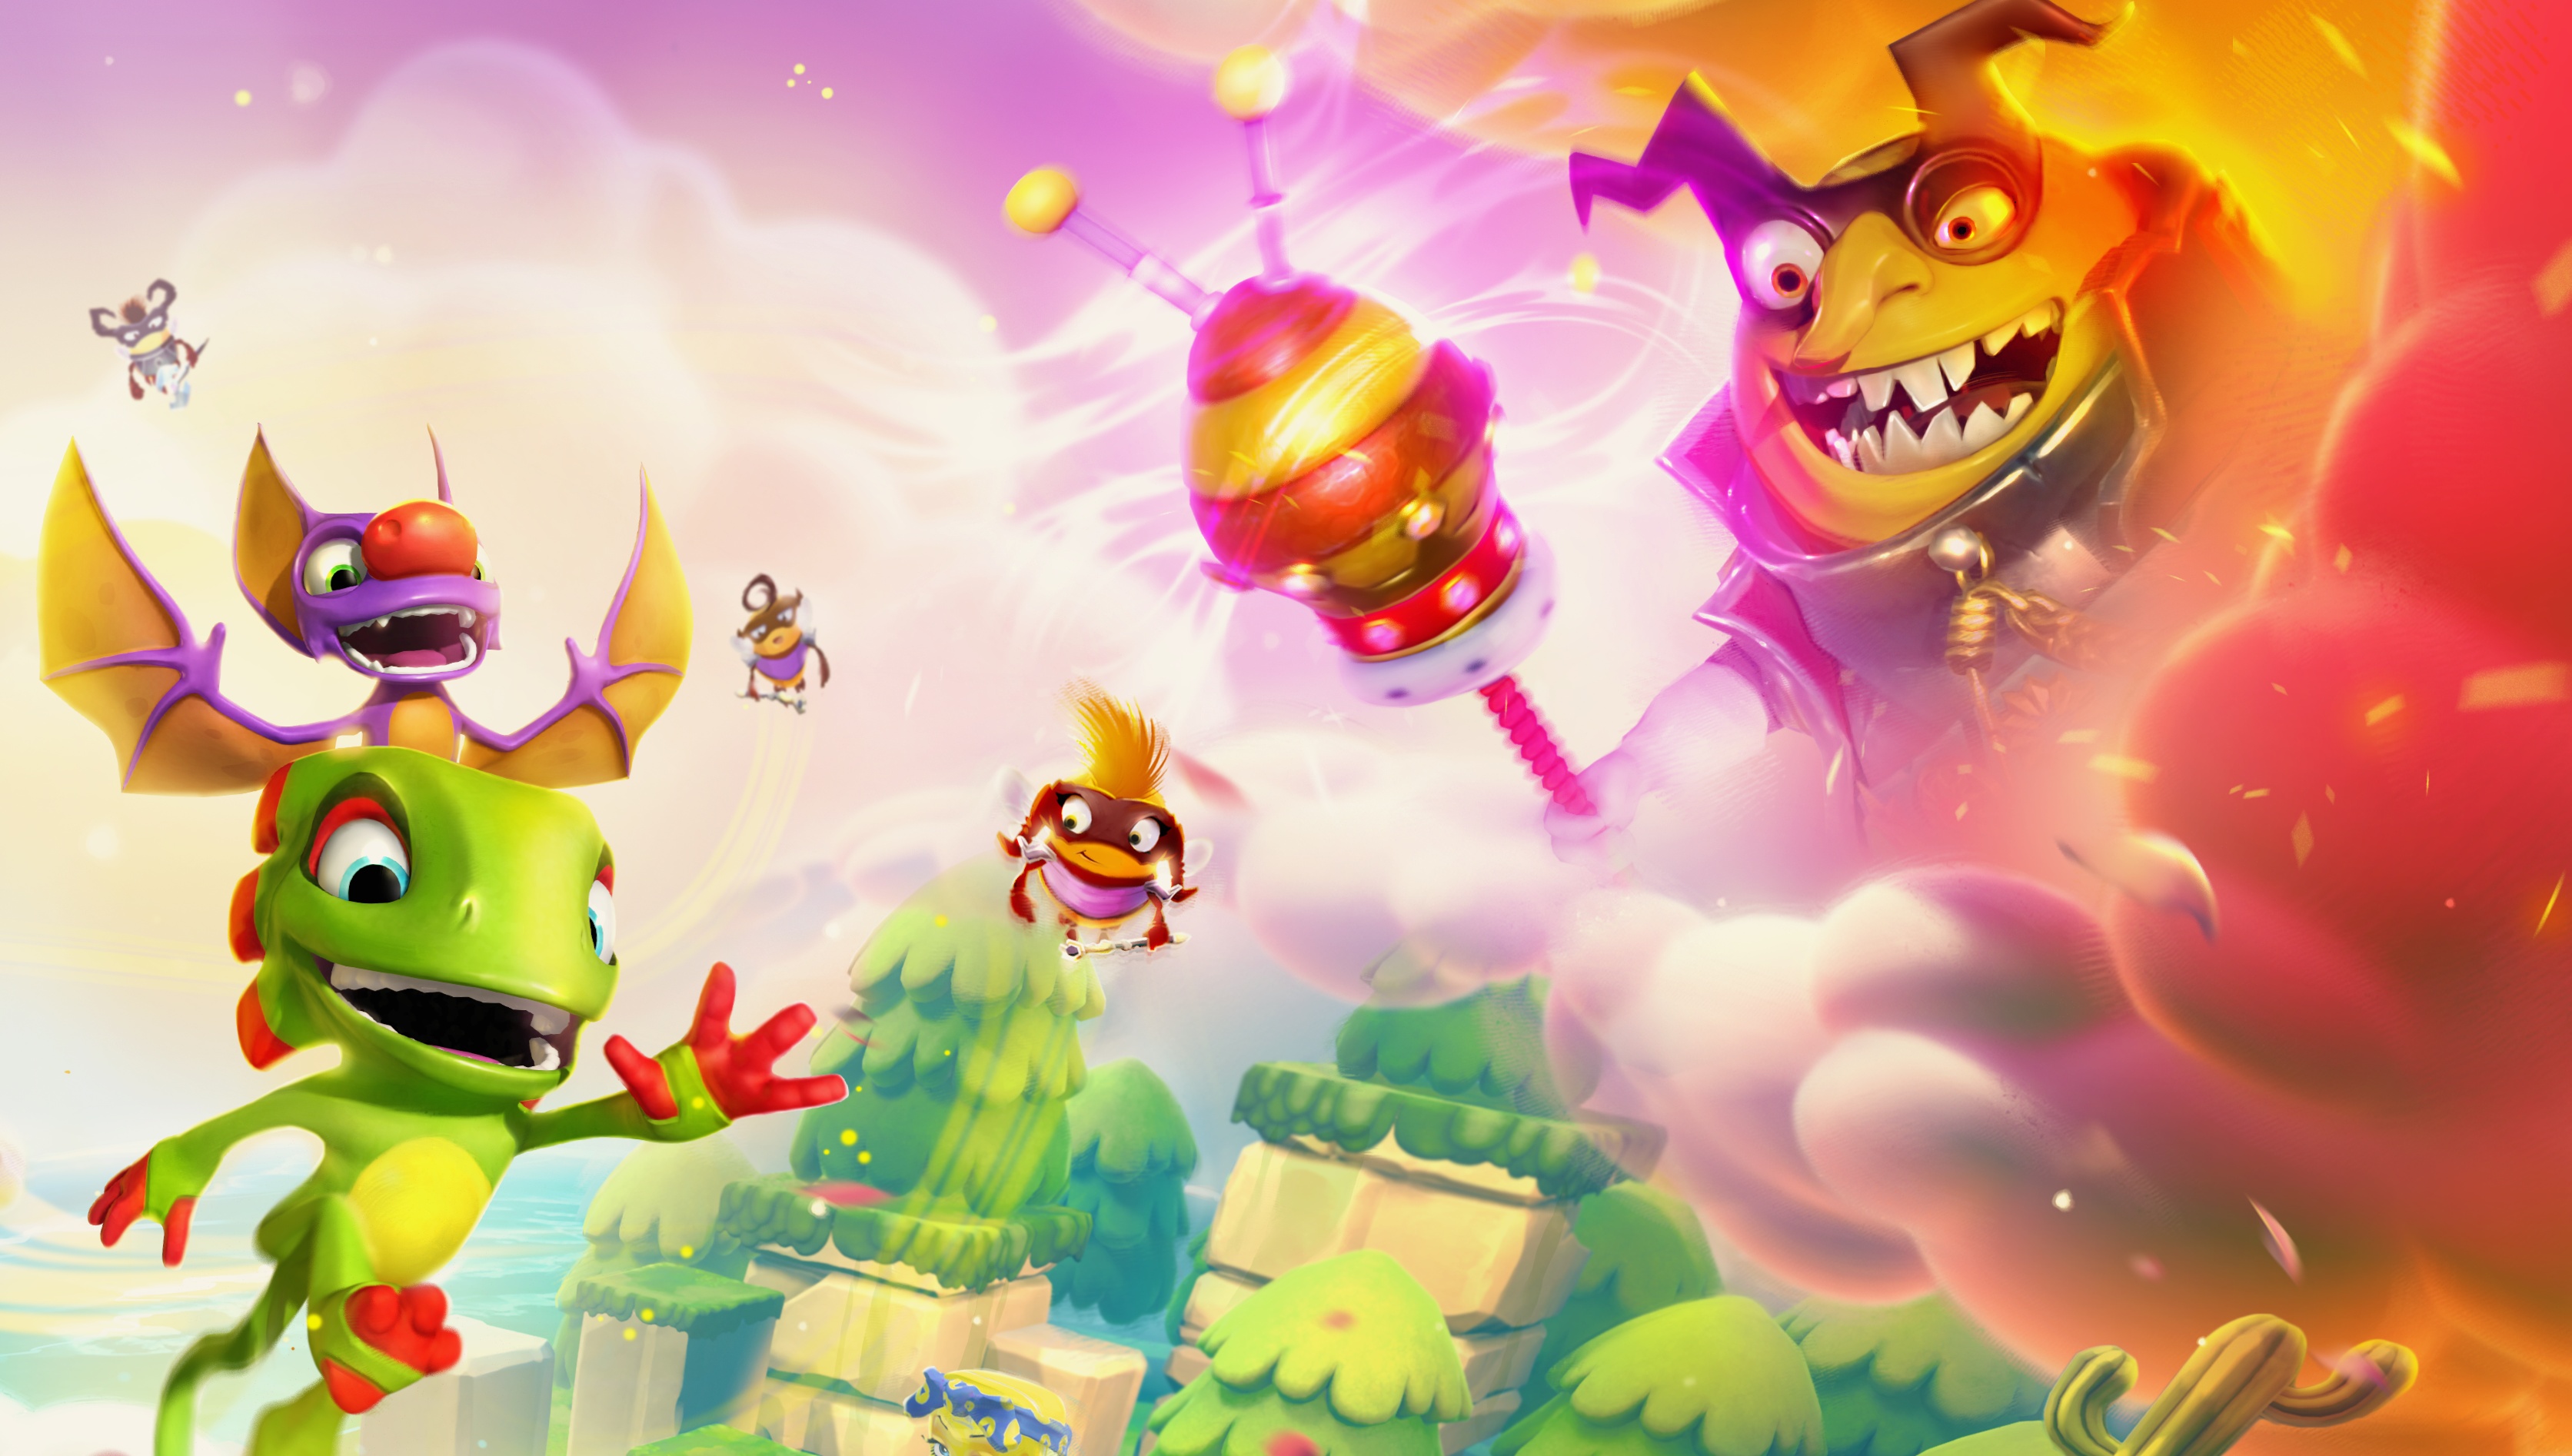 Yooka-Laylee and the Impossible Lair coming this October